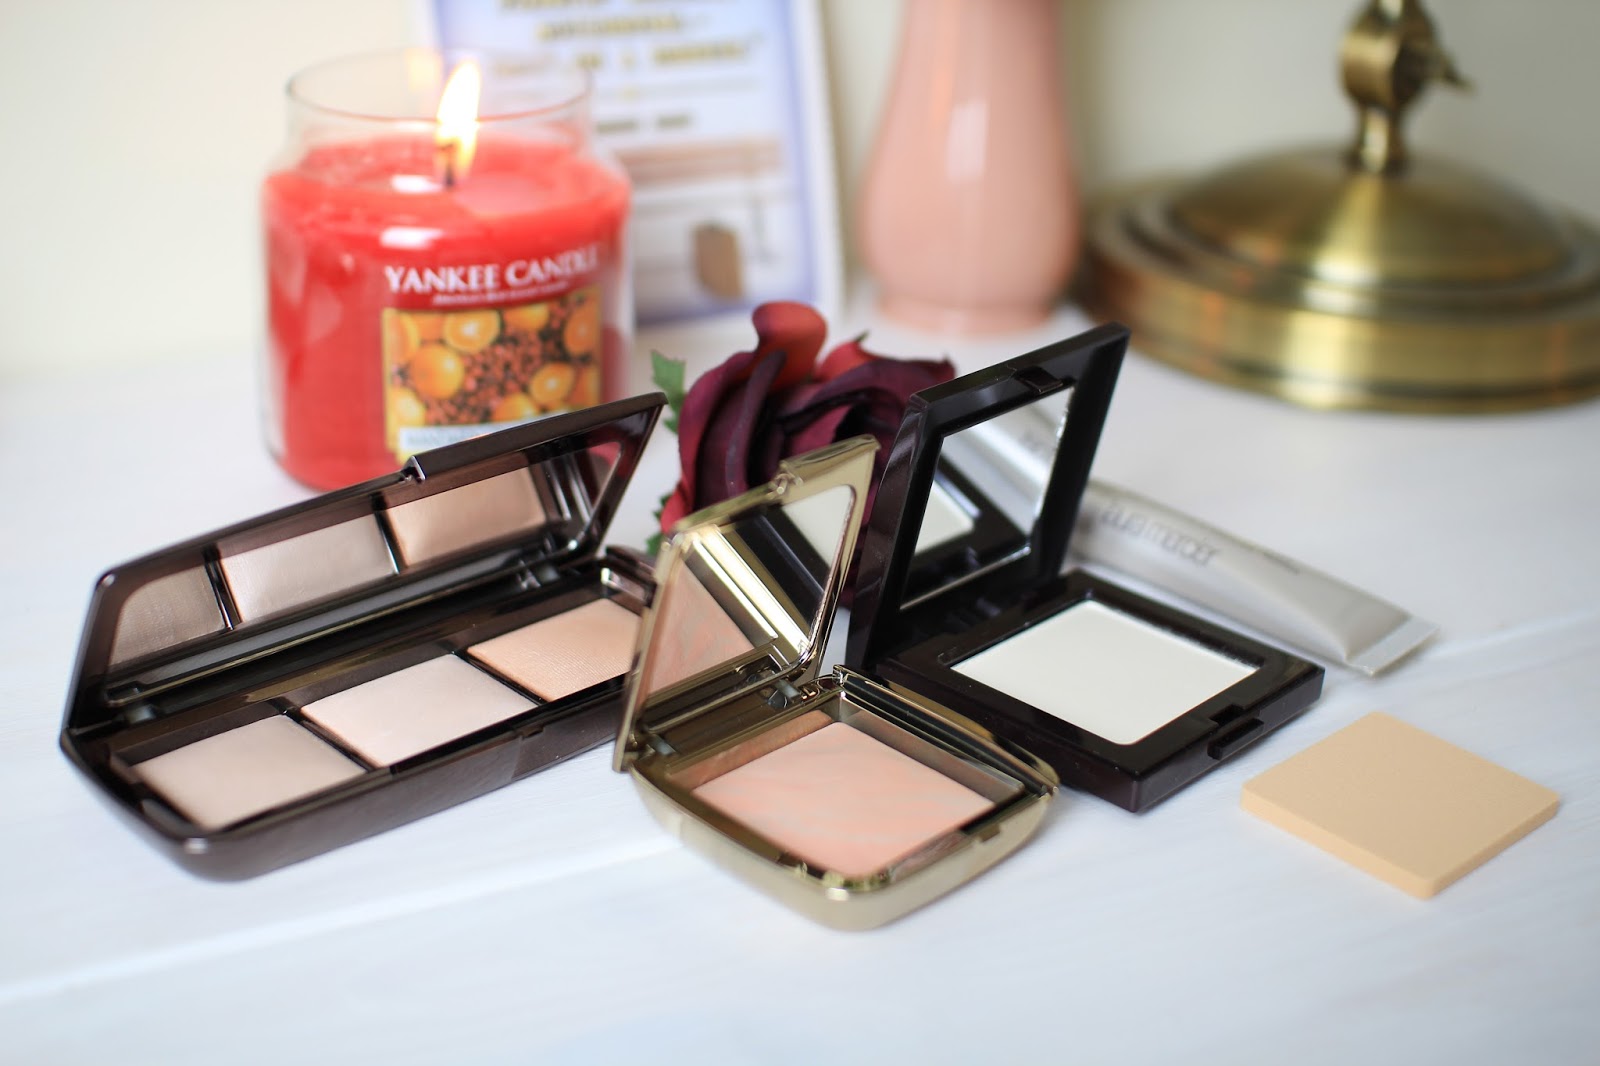 The Hourglass Ambient Lighting Palette, Dim Infusion Blush and Laura Mercier Pressed Powder